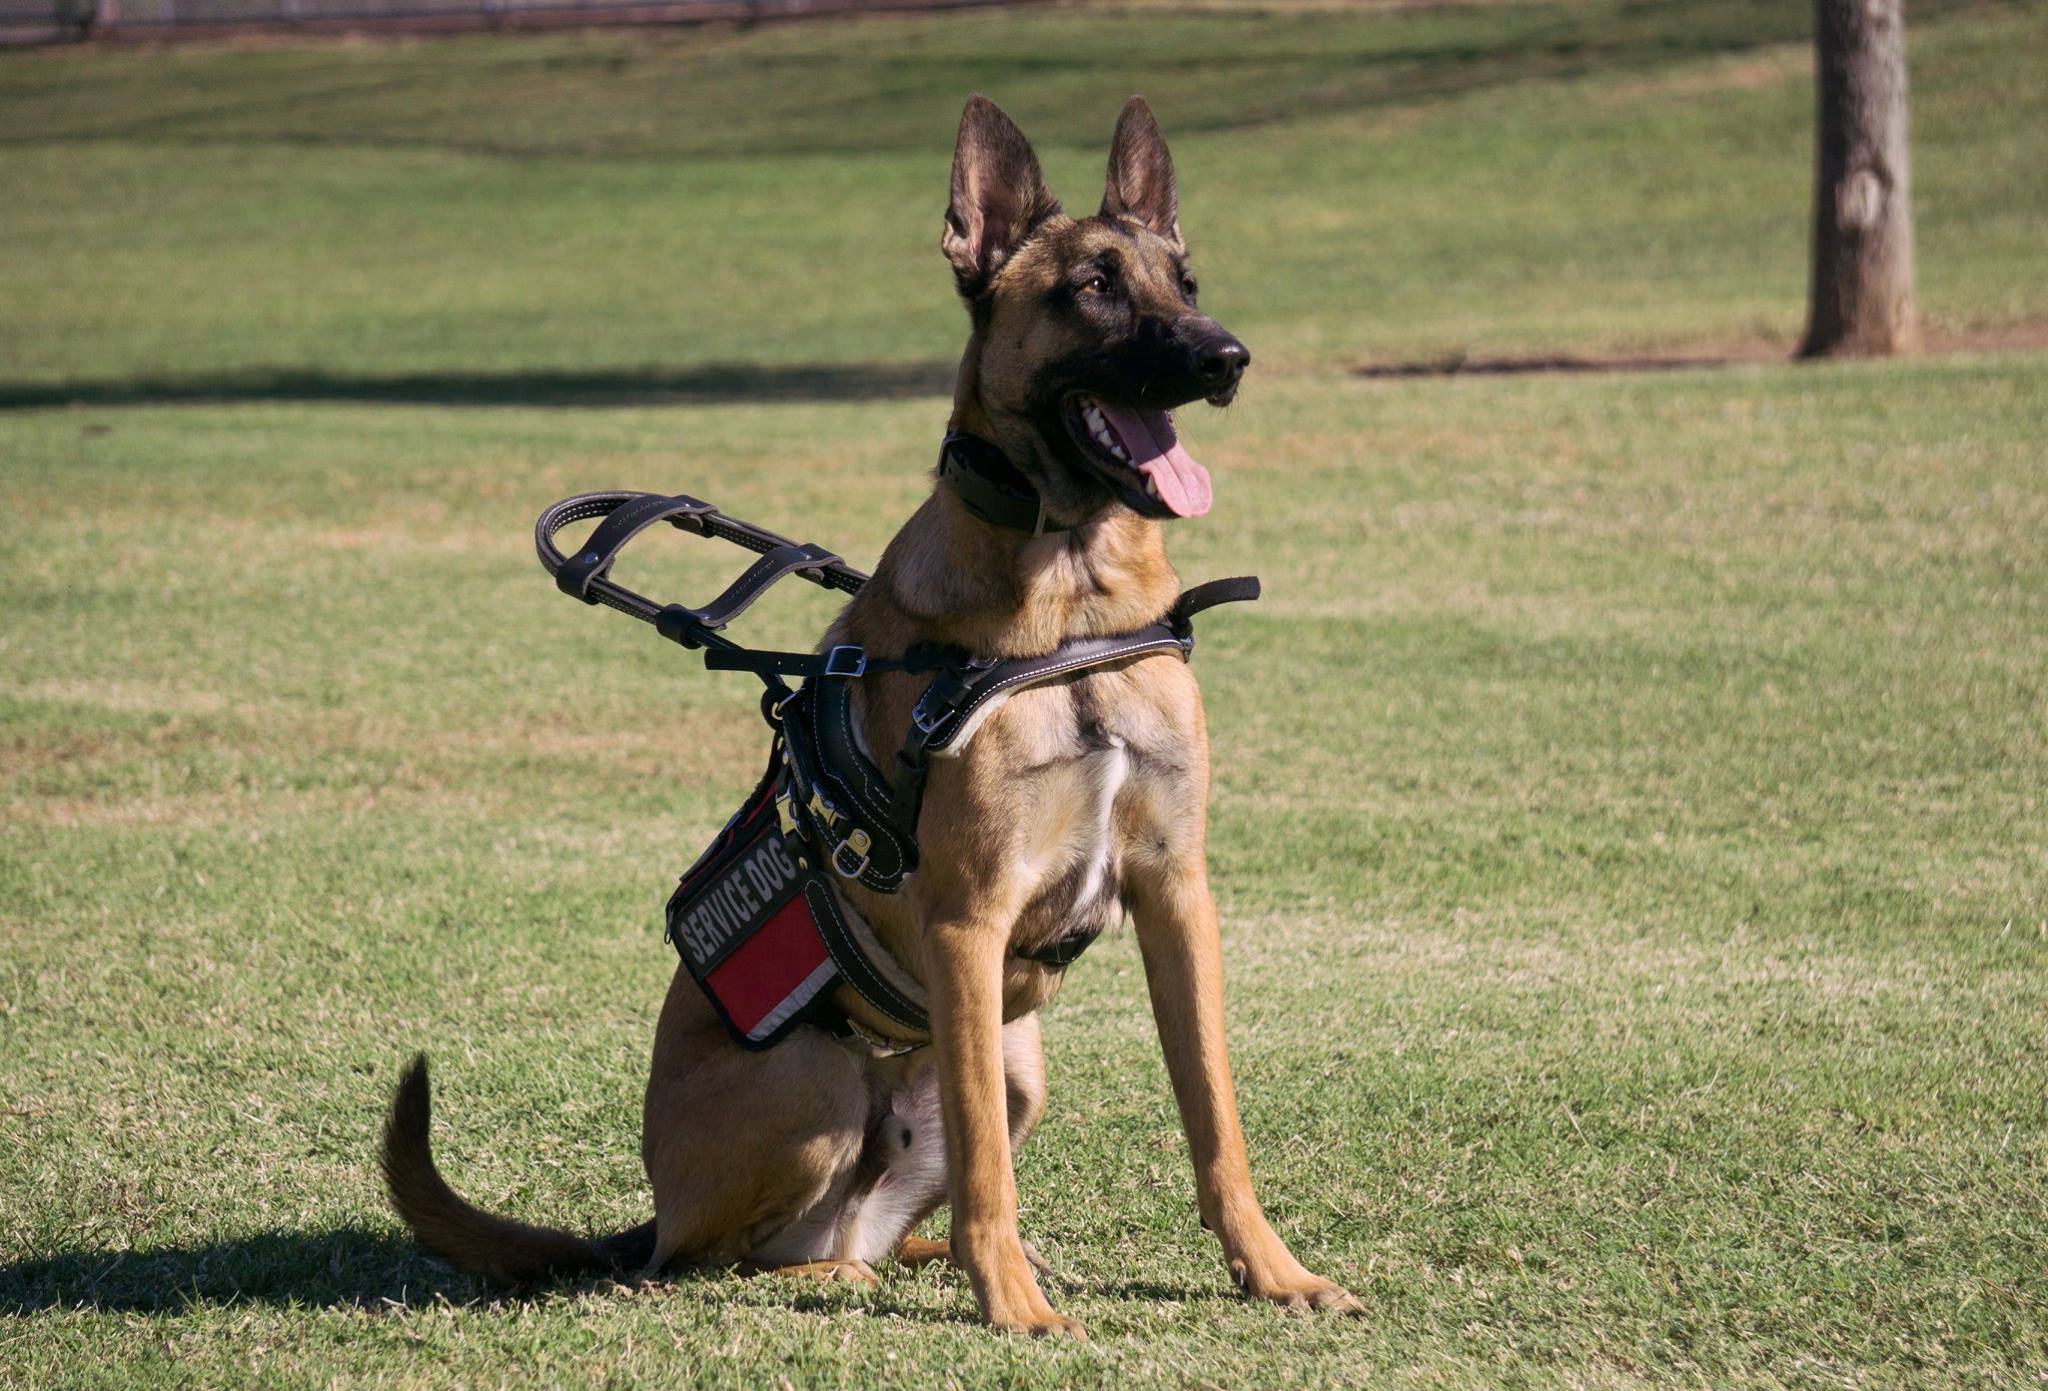 Spending Your Summer with a Service Dog in Scottsdale